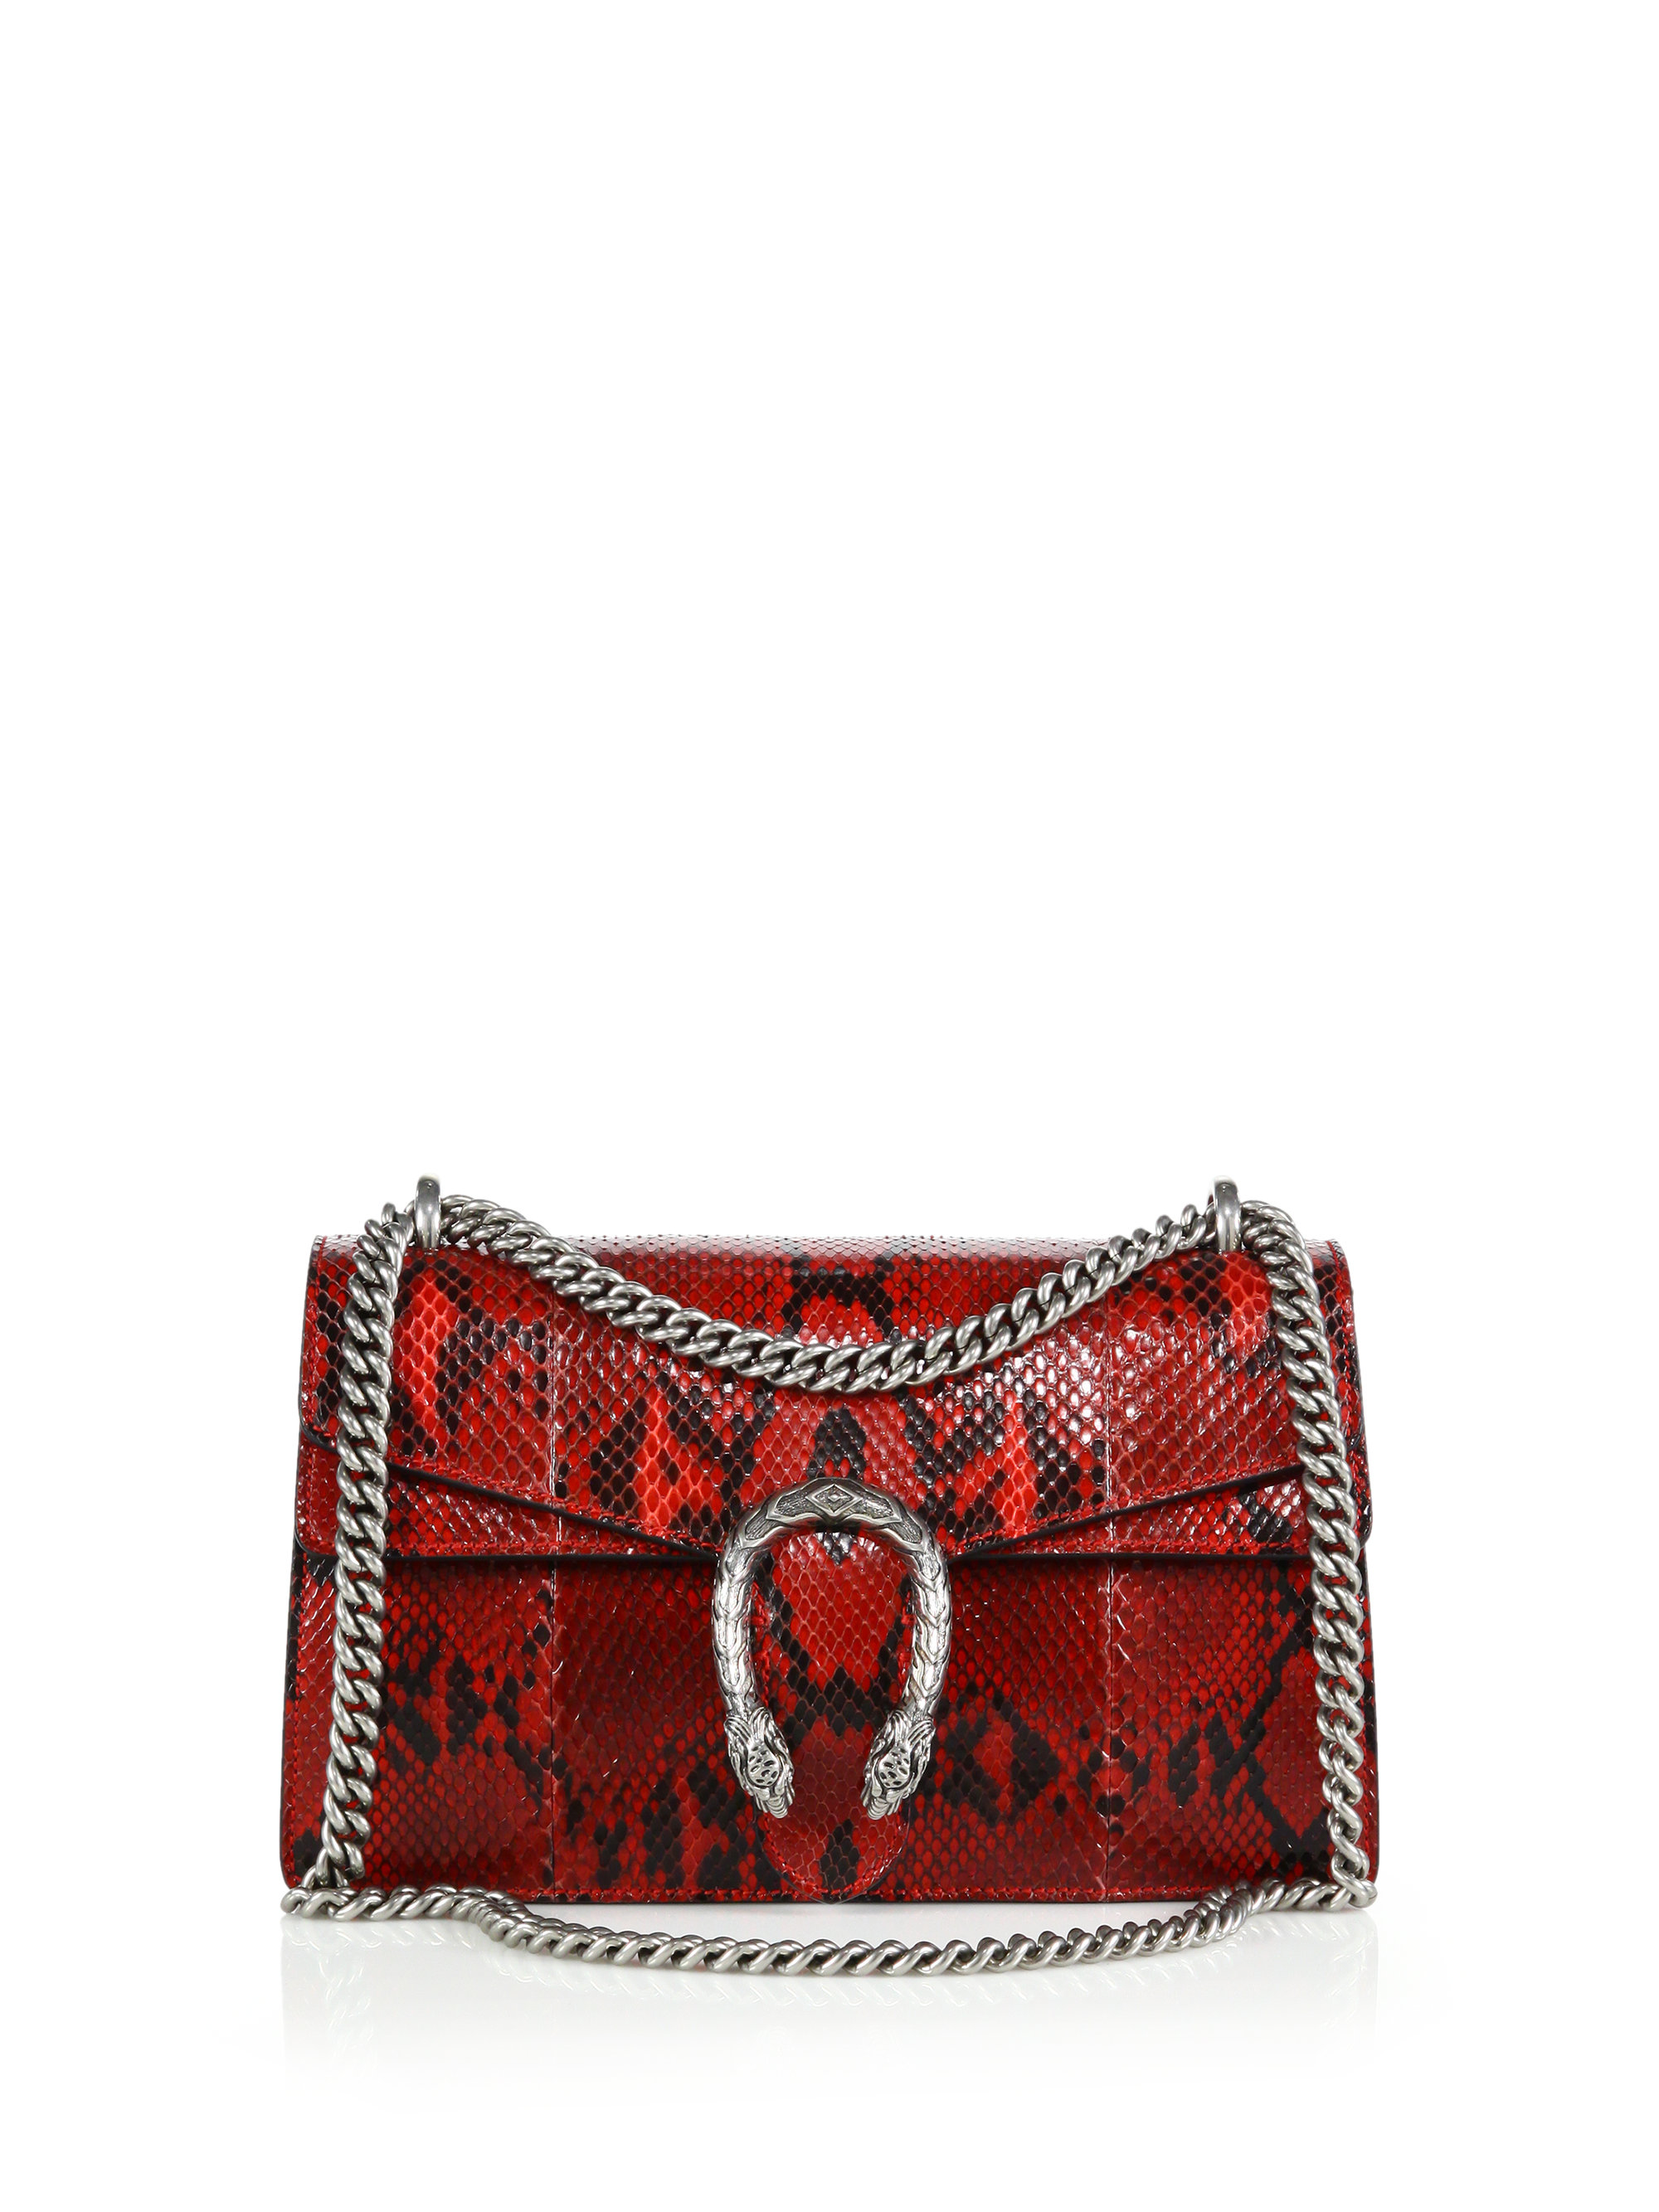 Lyst - Gucci Dionysus Small Python Shoulder Bag in Red